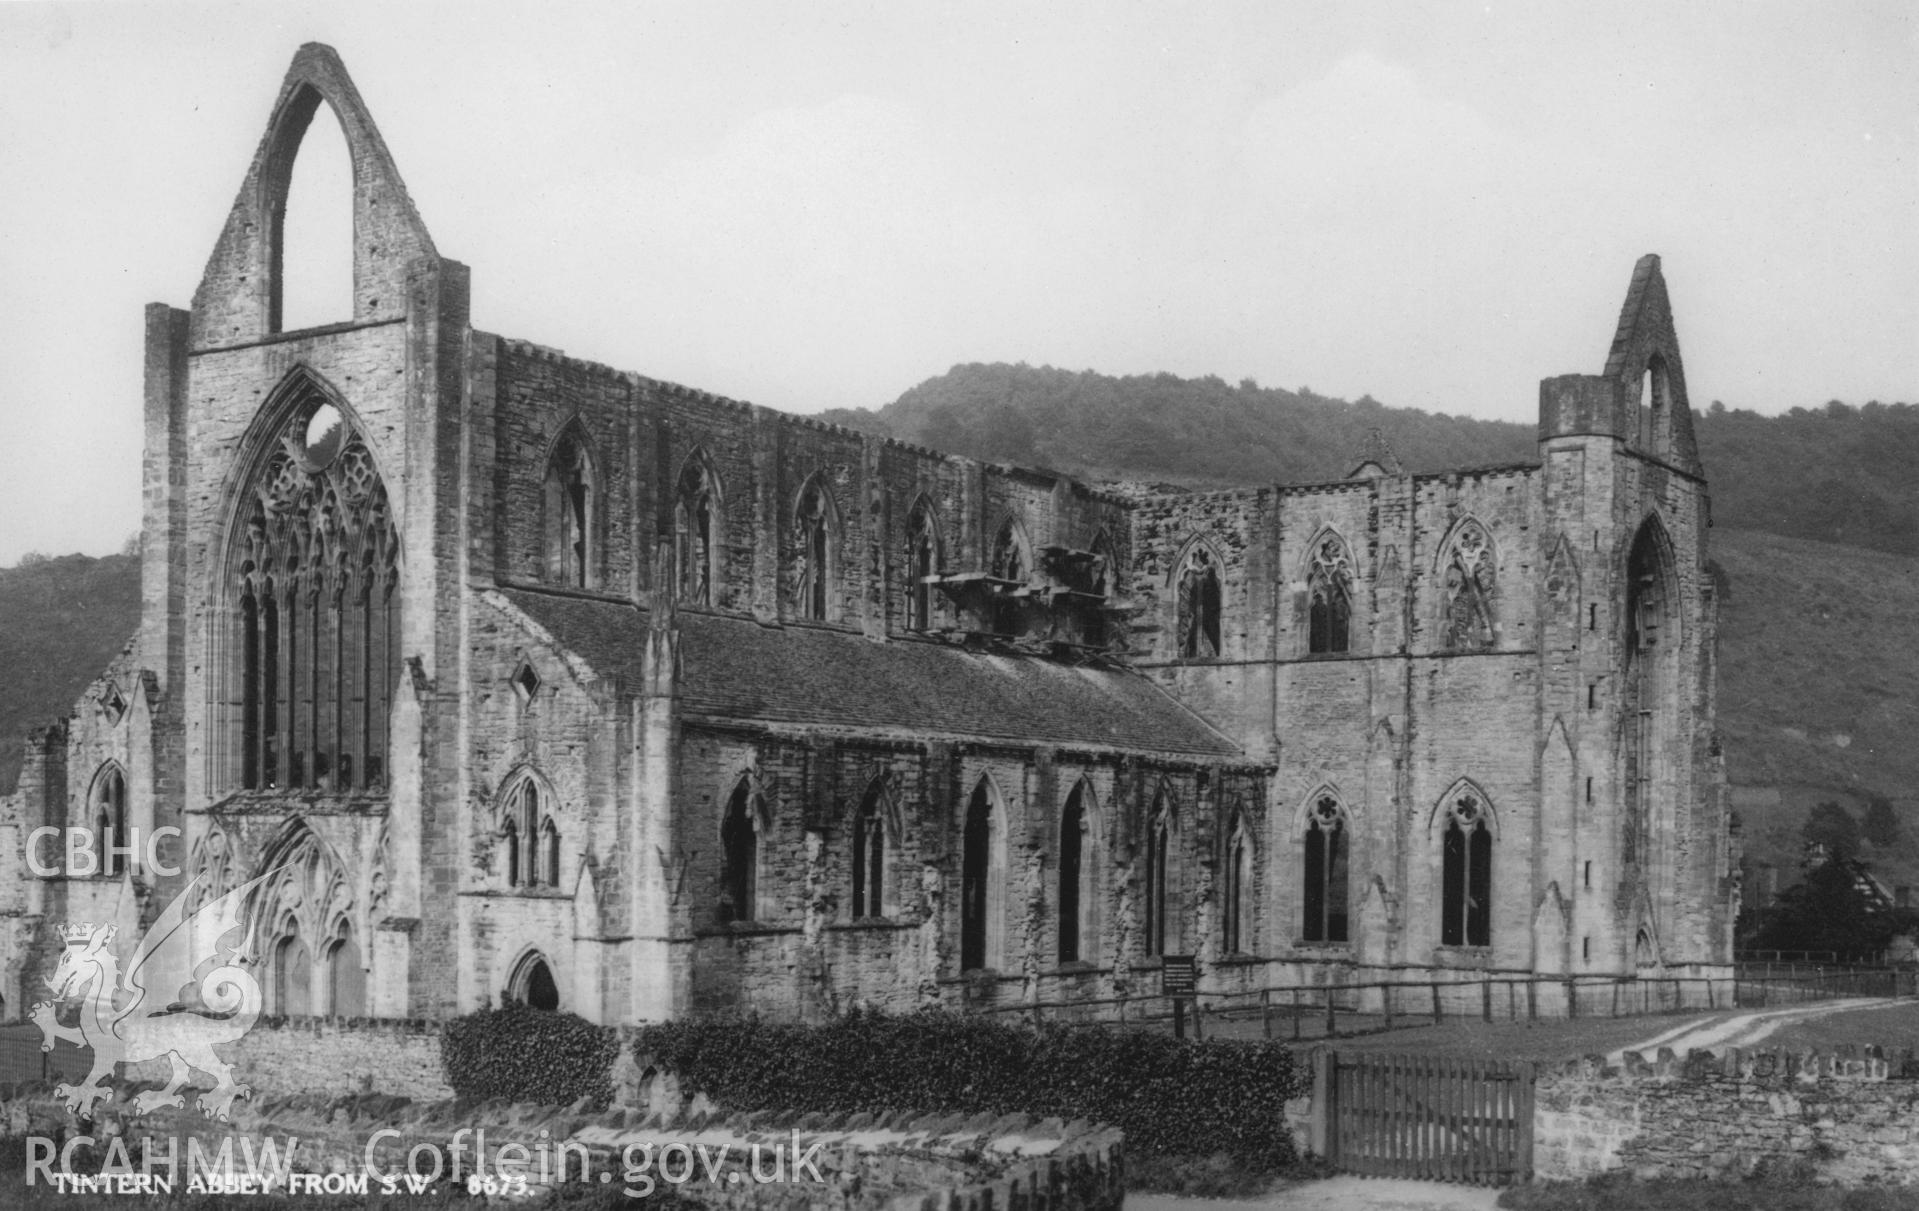 Digital copy of a postcard showing a general view of Tintern Abbey from the southeast, received via Miss D Burn 16.09.1966.